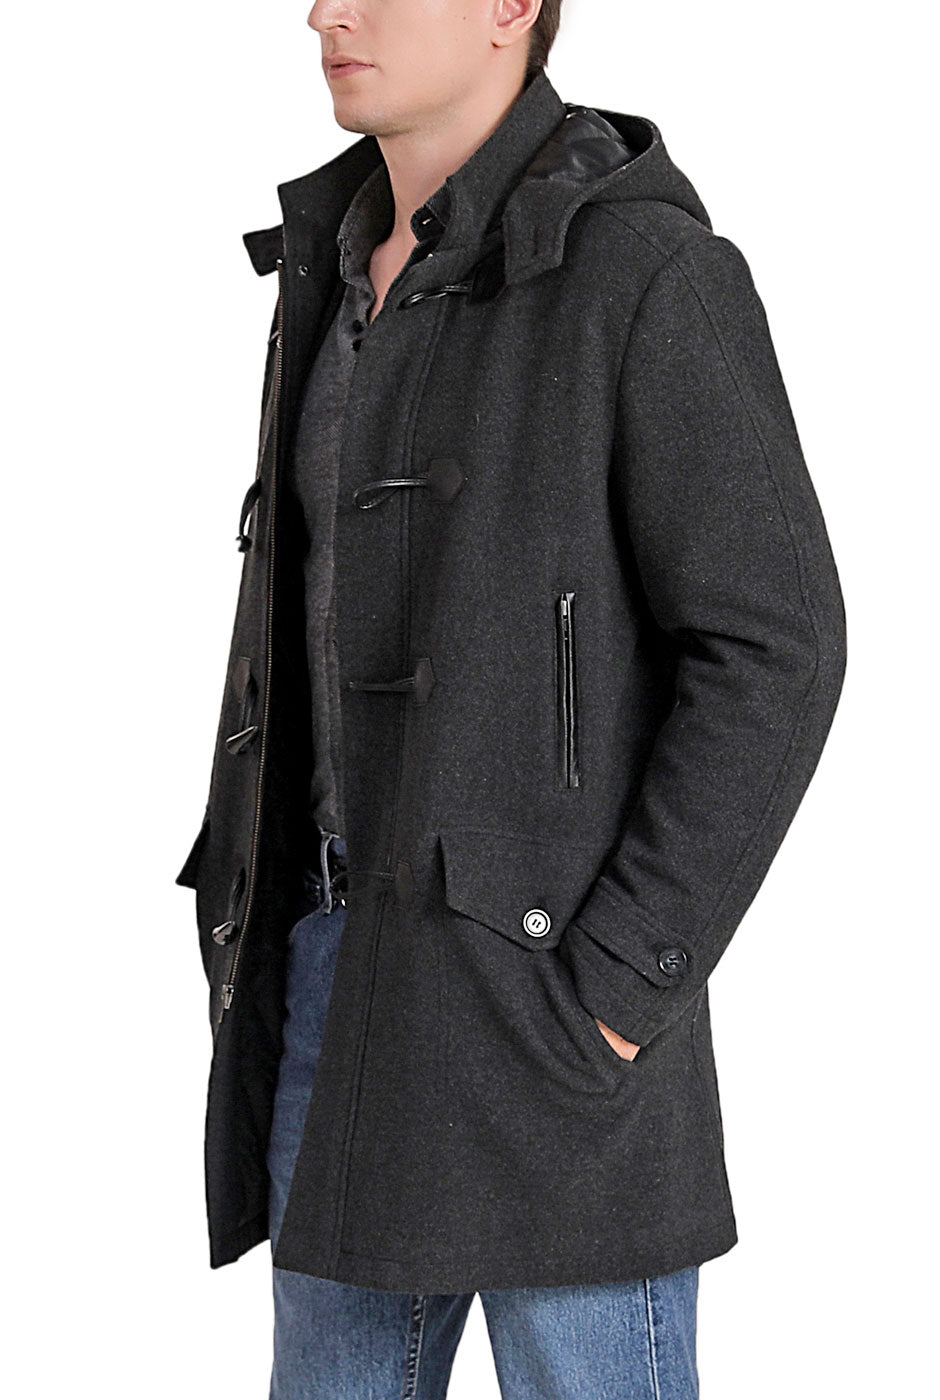 BGSD Men Tyson Wool Blend Leather Trimmed Toggle Coat